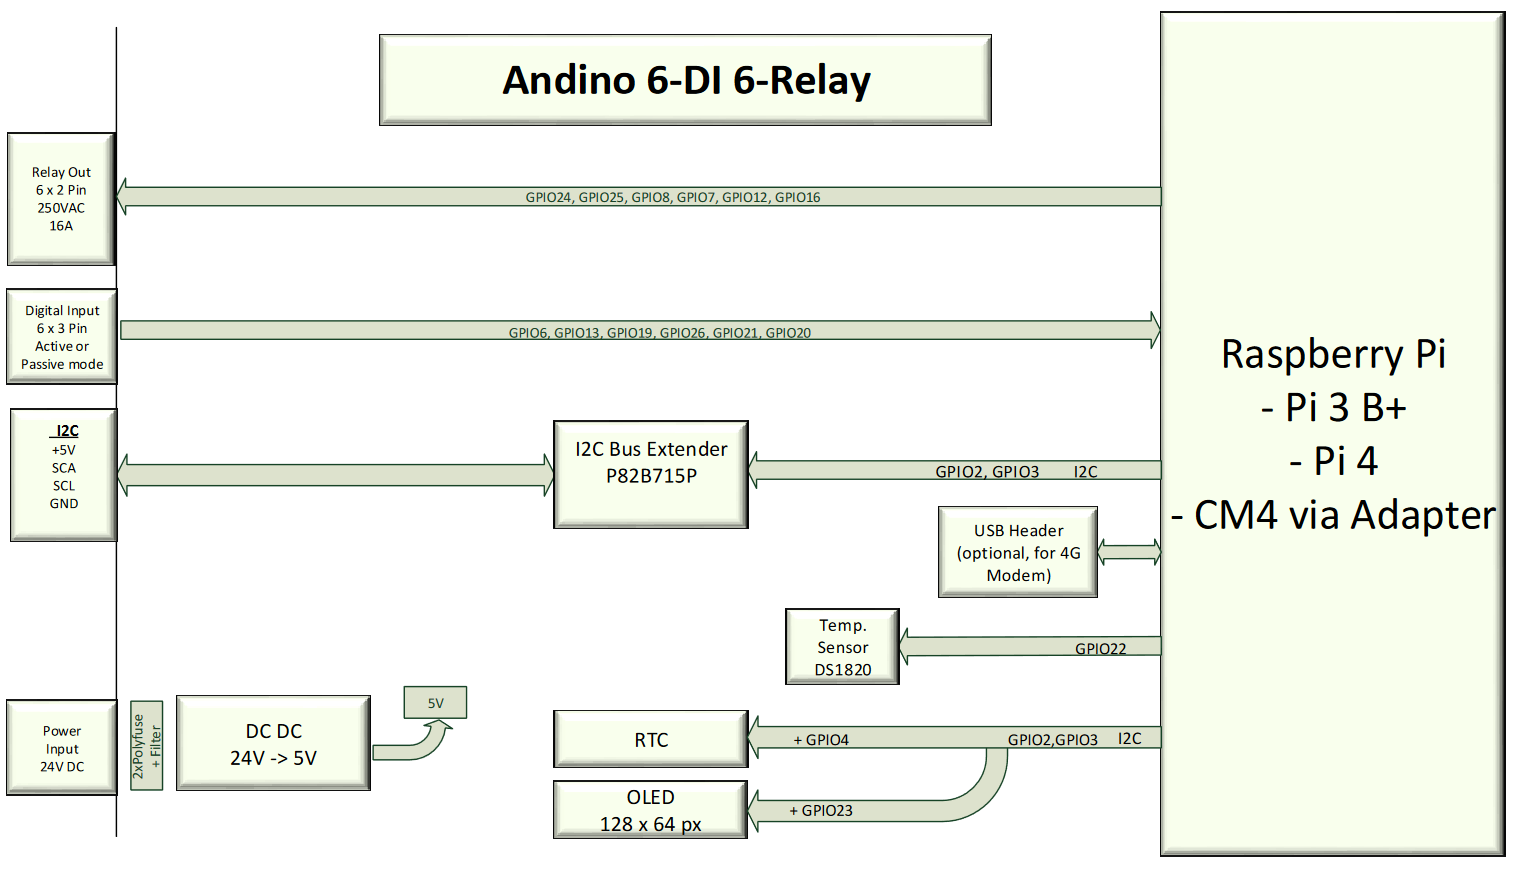 Block diagram of the Andino XIO, laying out the connection of all components to the Raspberry Pi